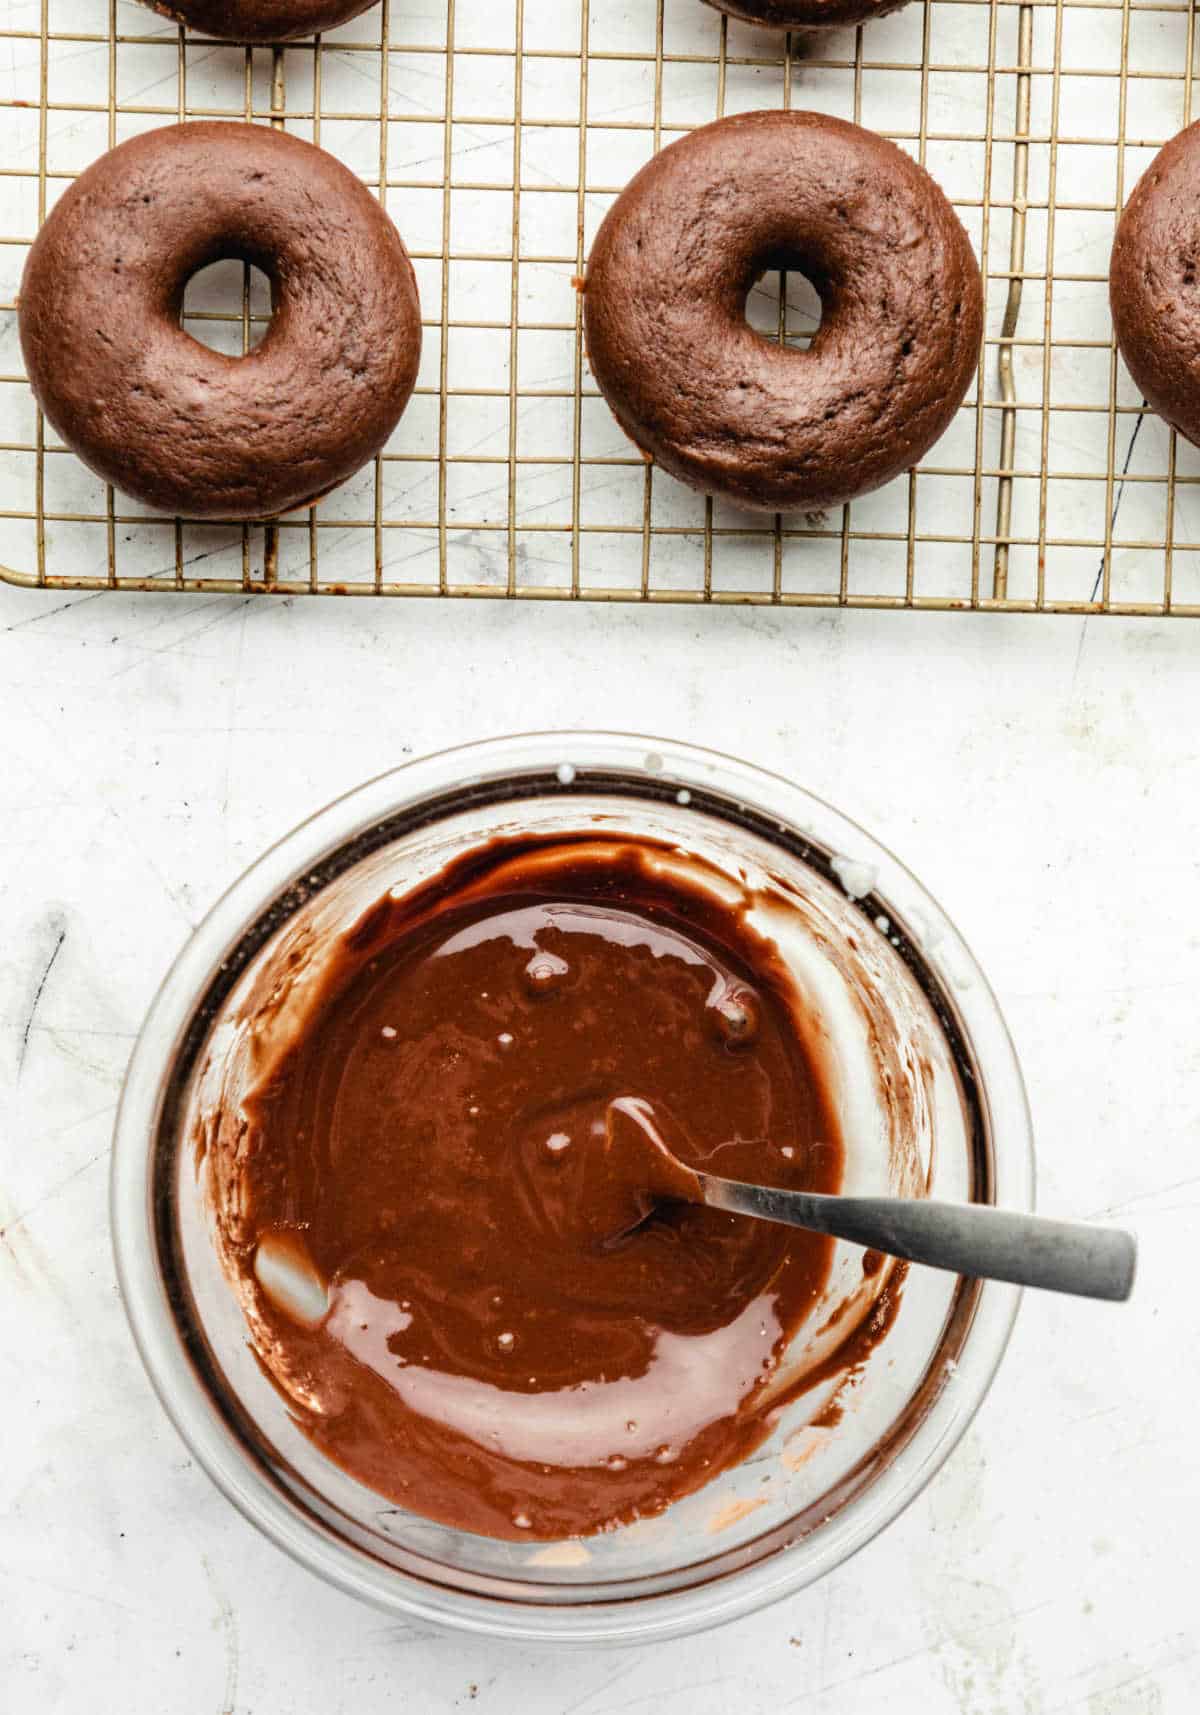 Chocolate buttermilk glaze next to a wire cooling rack.